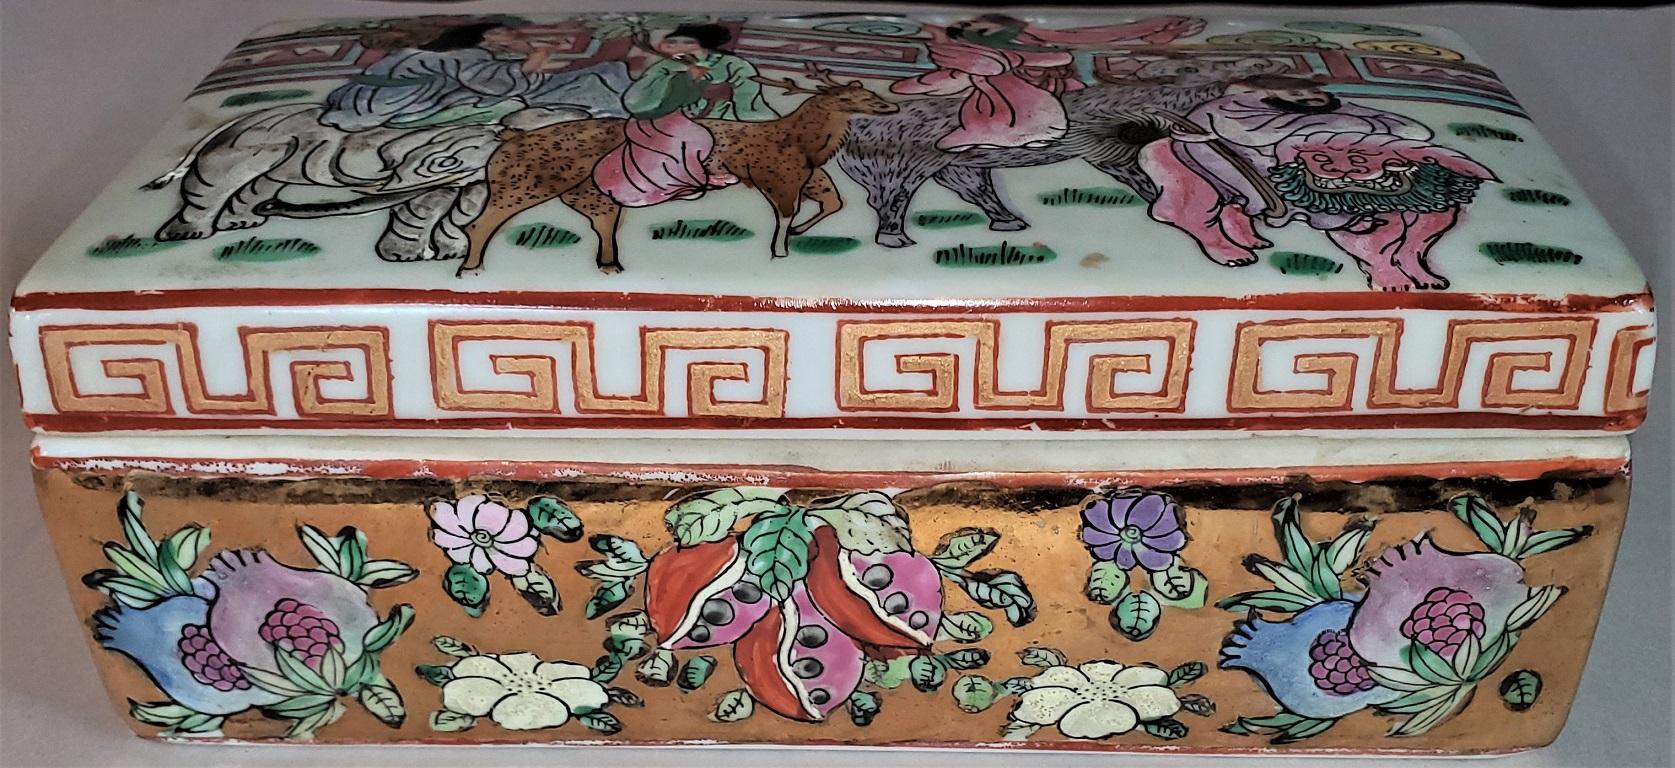 Hand-Painted Chinese Famille Rose Lidded Porcelain Trinket Box